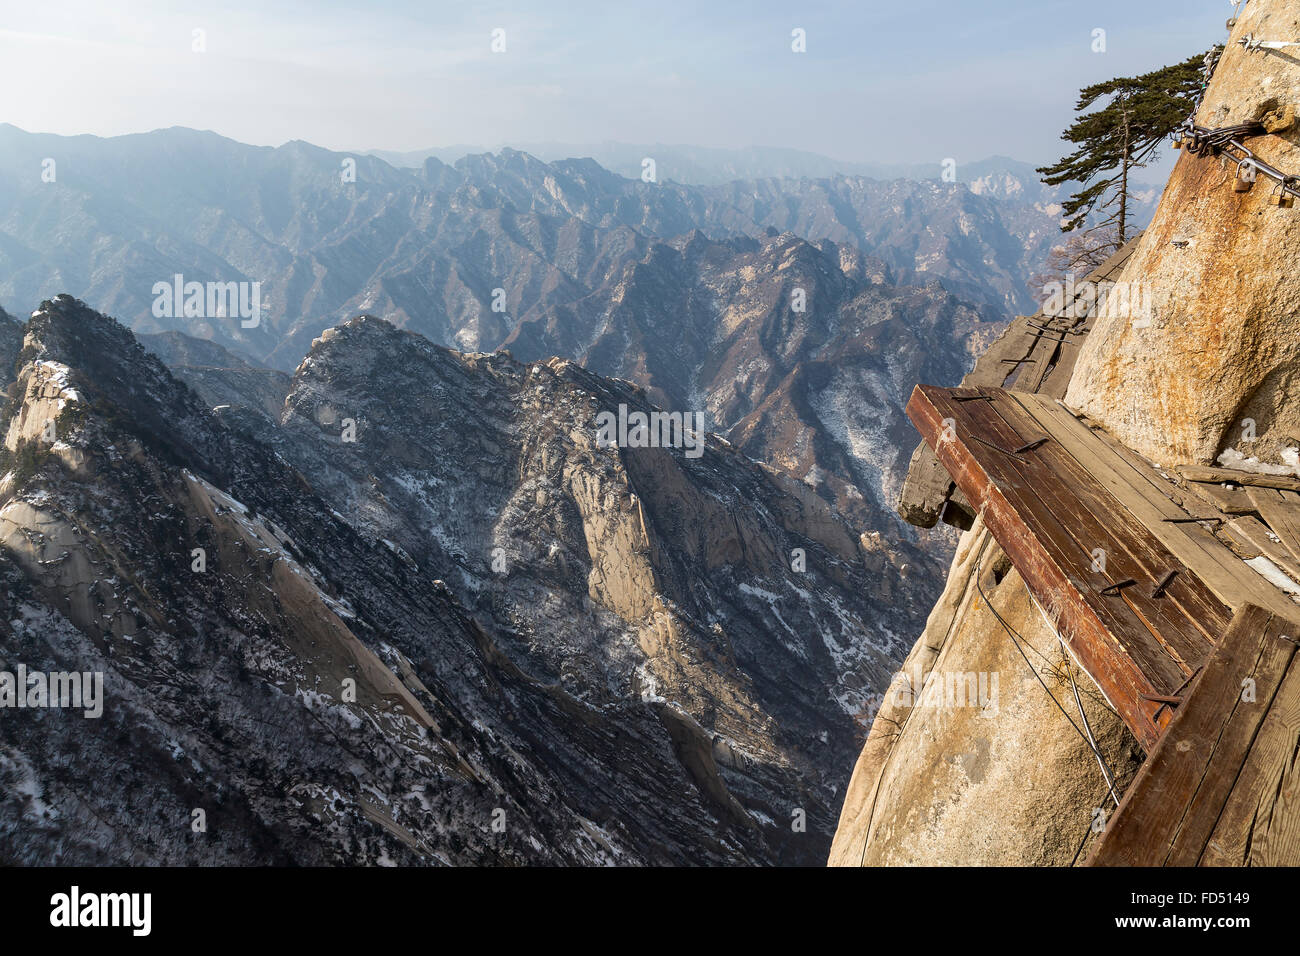 View form the Danger Trail of Mount Hua Shan Stock Photo